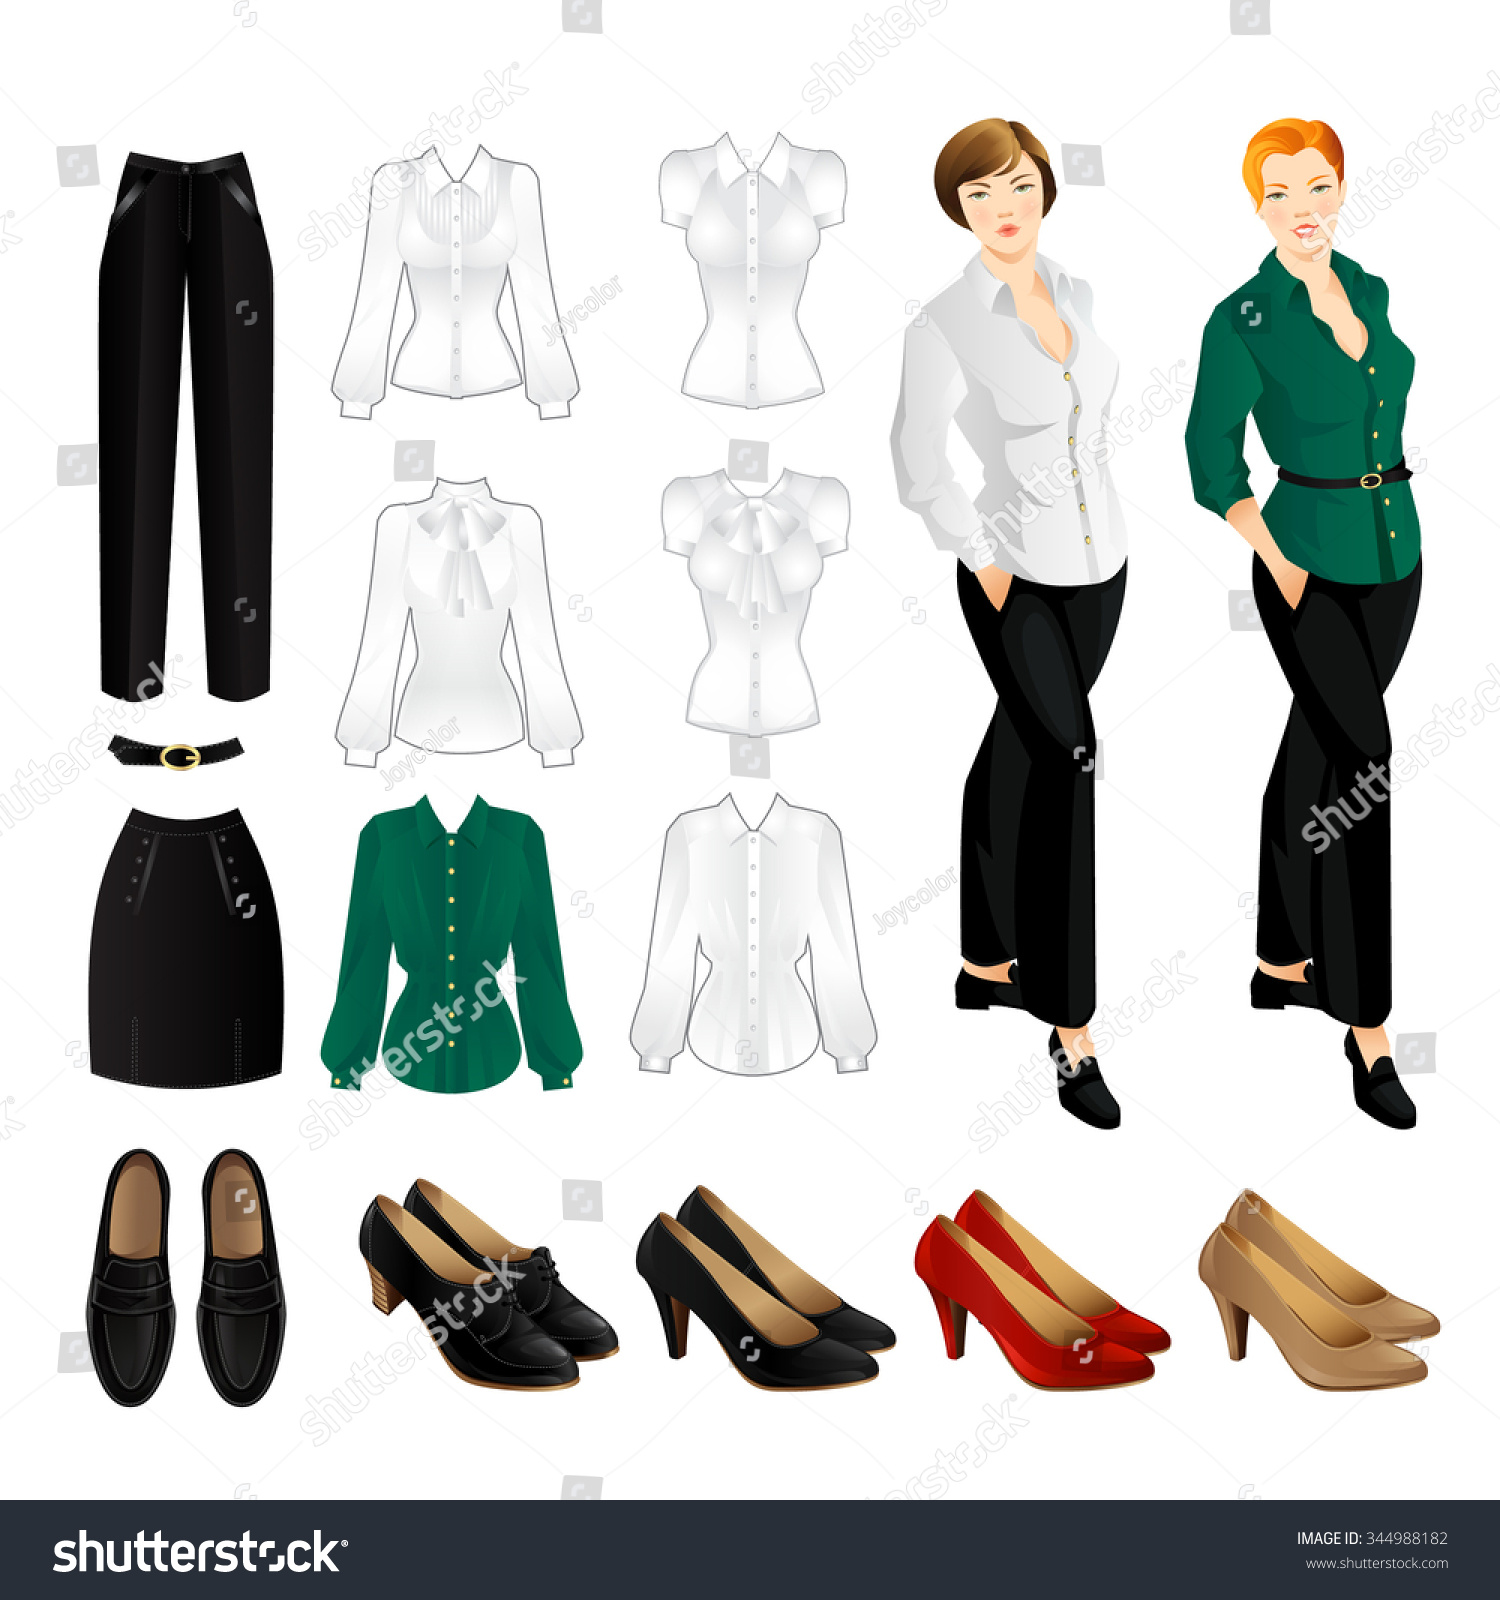 Vector Illustration Of Formal Clothes And Shoes - 344988182 : Shutterstock